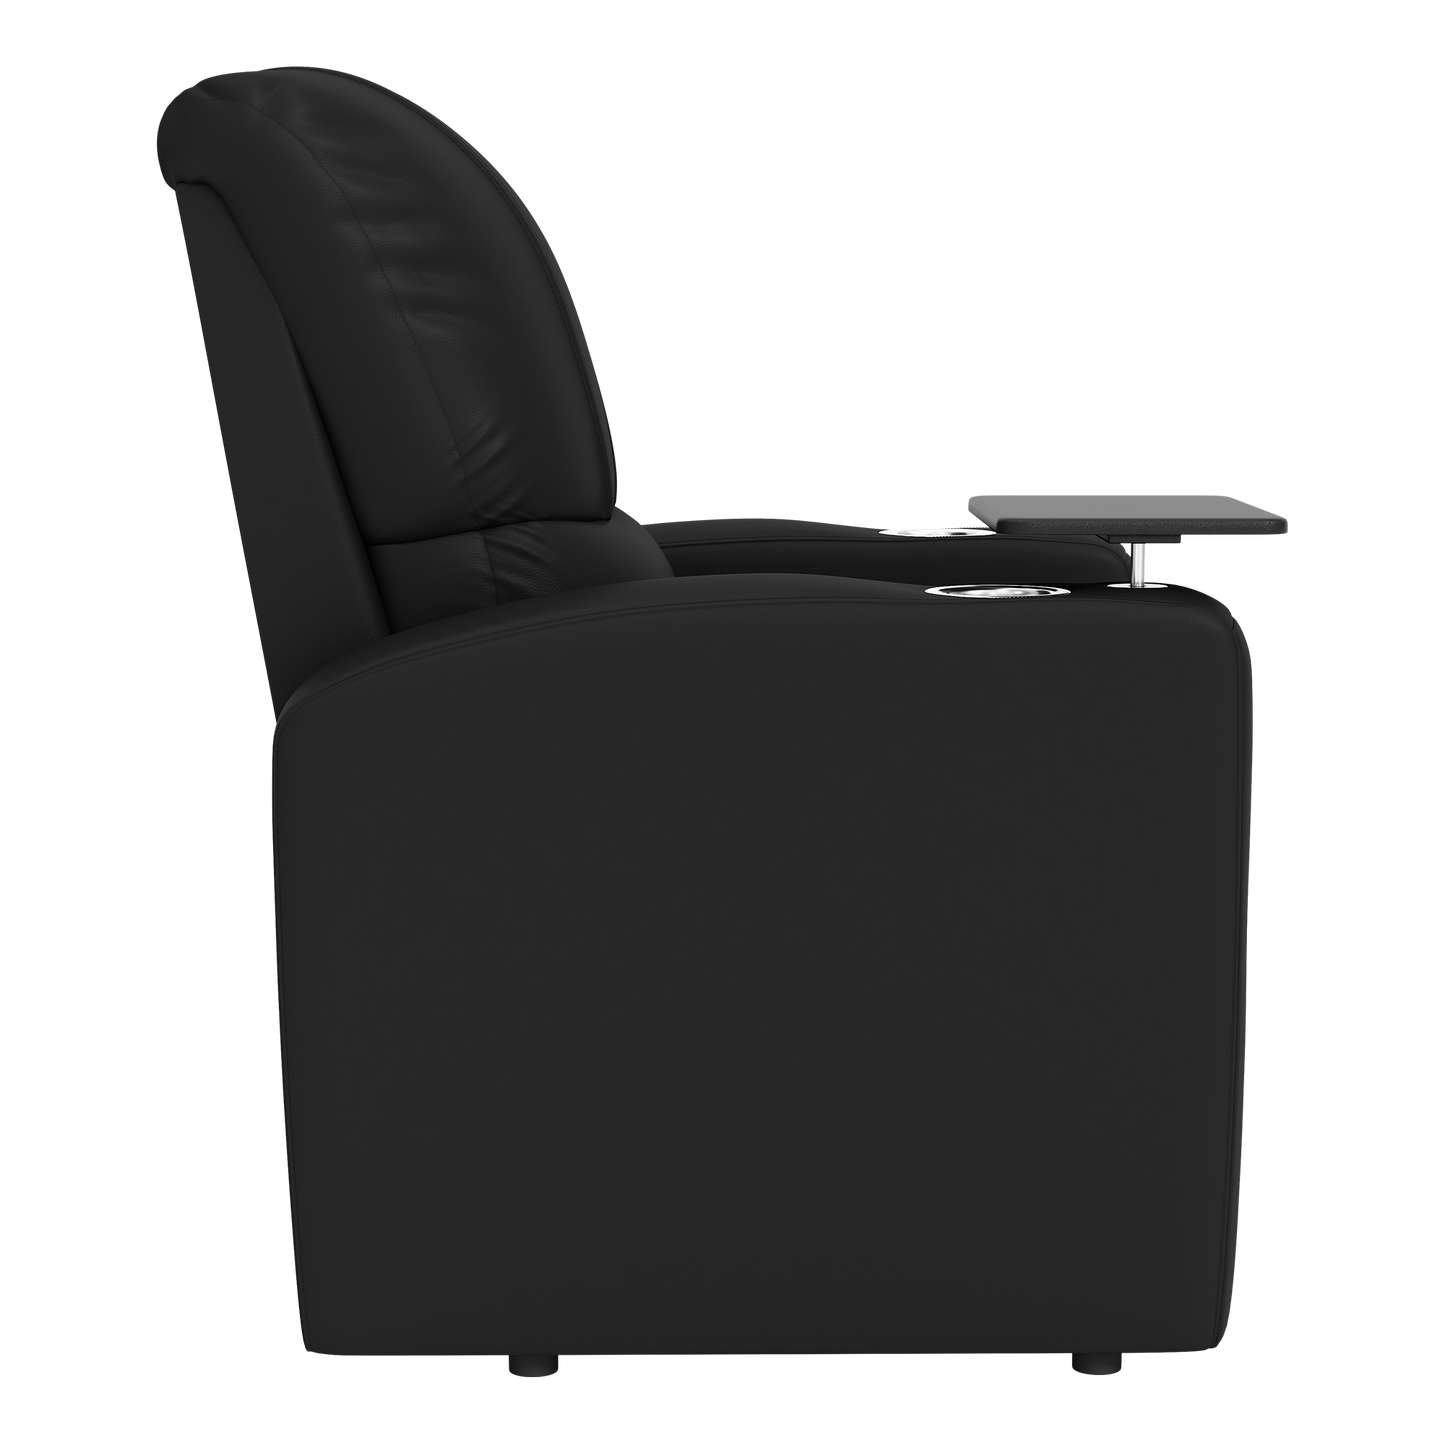 Stealth Power Plus Recliner with Kentucky Wildcats Logo